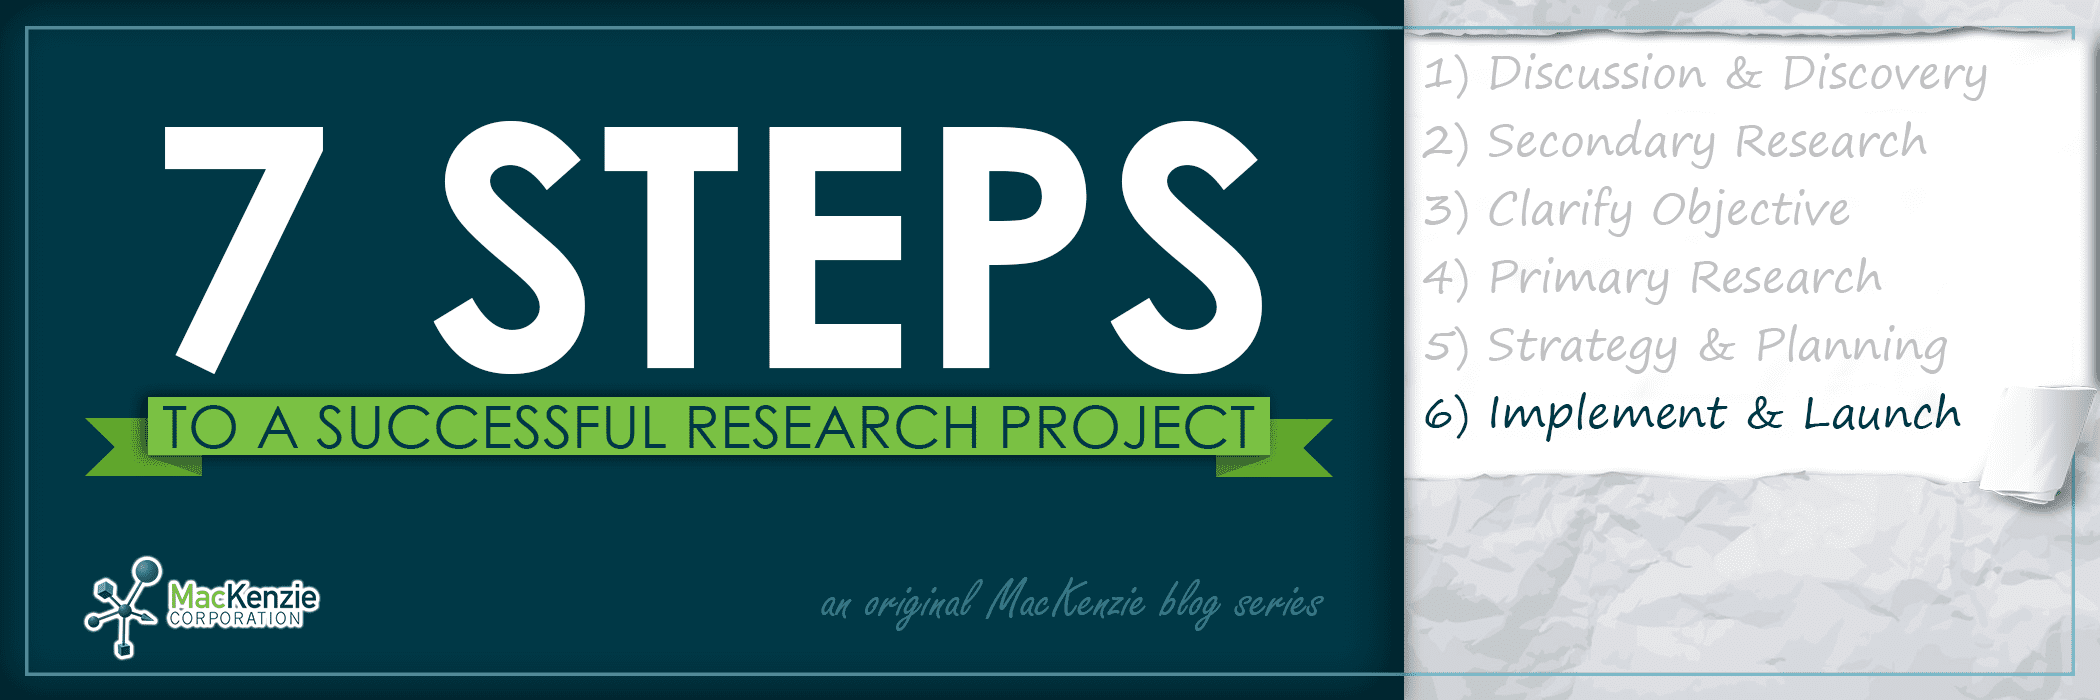 A Successful Research Project – Step 6: Implement & Launch